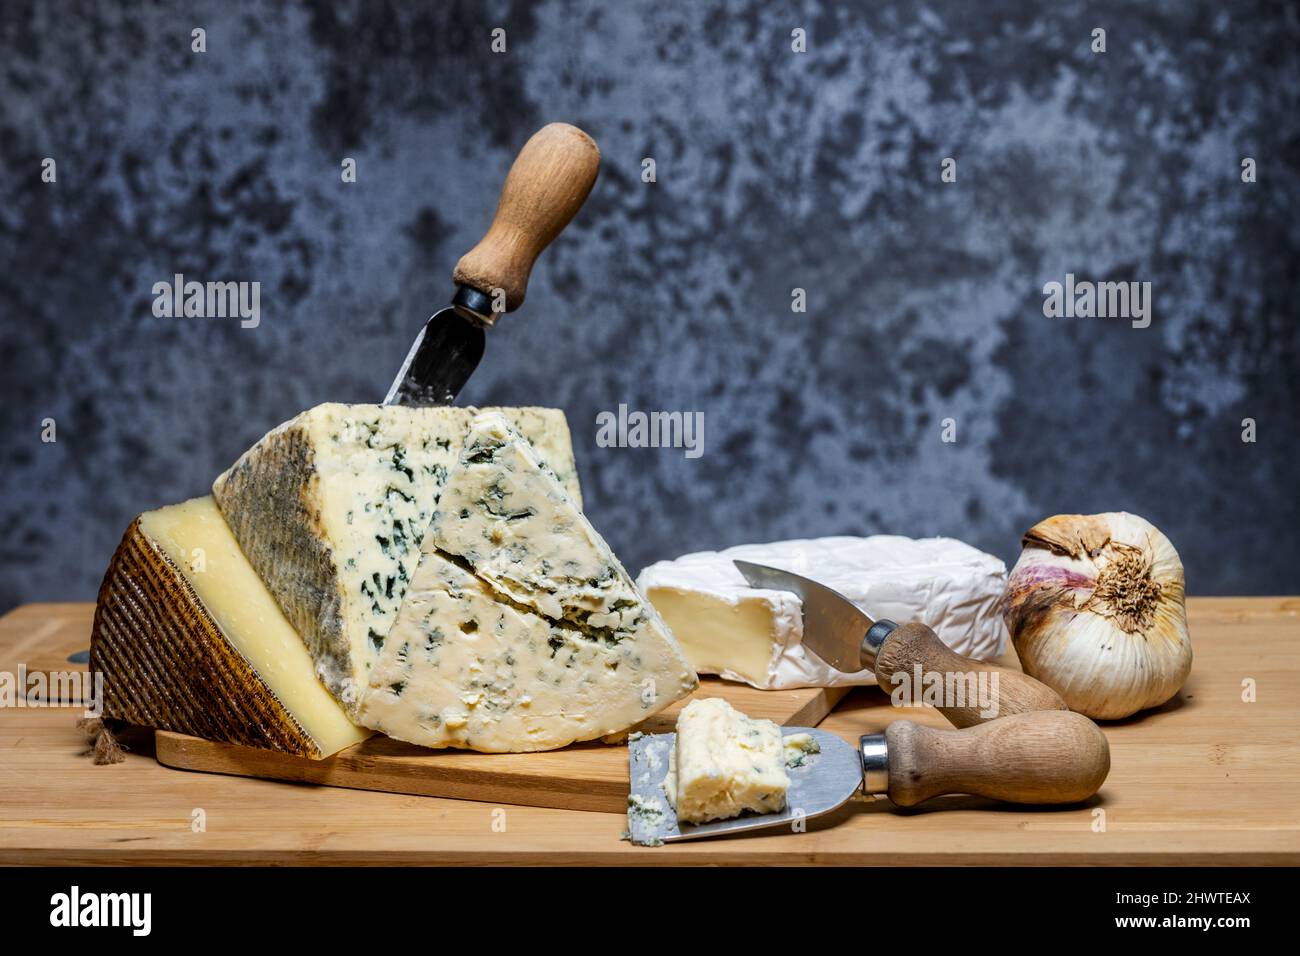 Still life with tacos of delicious and fragrant blue cheeses and brie cheese, a cured Manchego cheese and a head of garlic with small cheese knives an Stock Photo